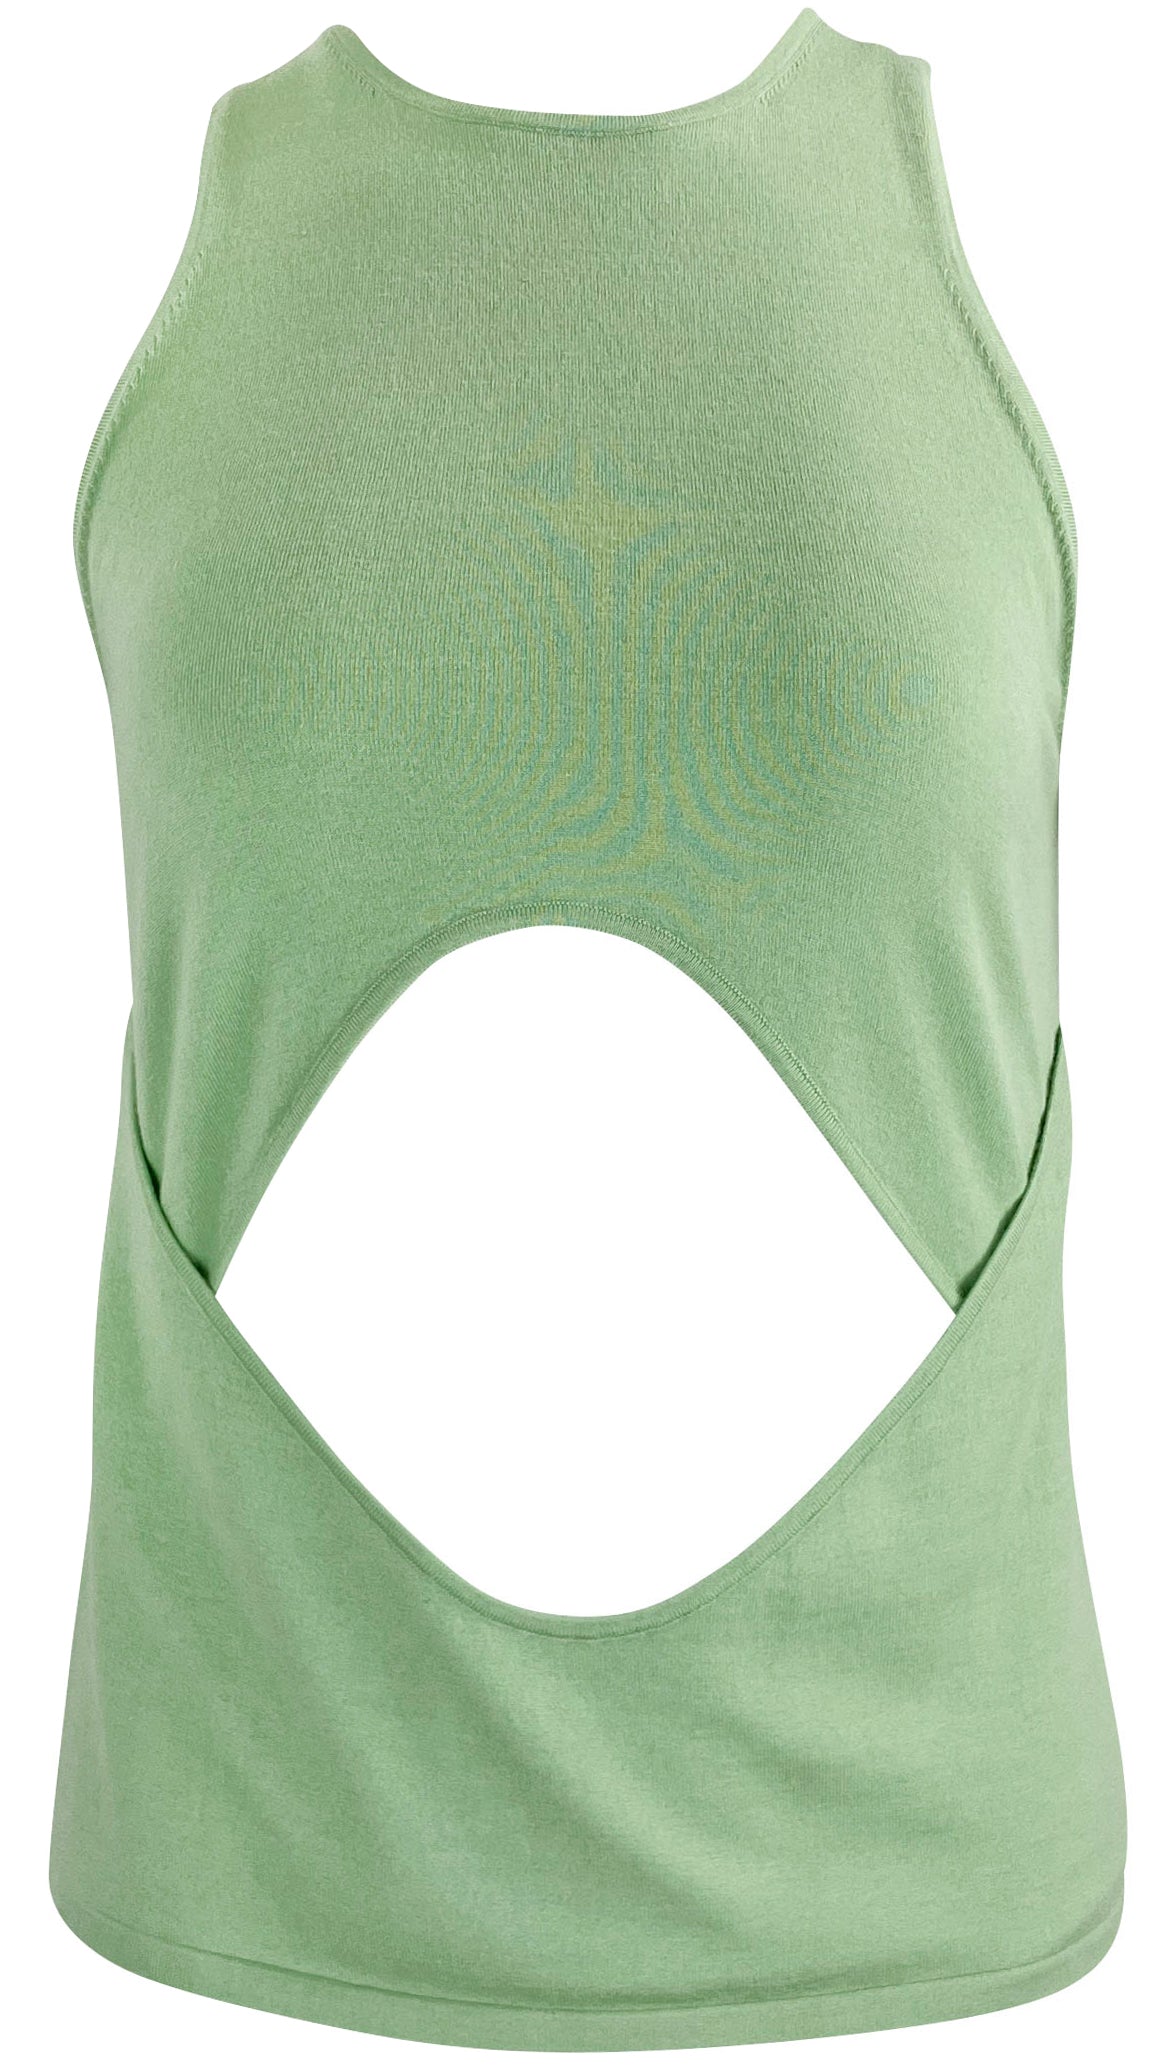 LAPOINTE Cut-Out Tank Top in Aloe - Discounts on LaPointe at UAL